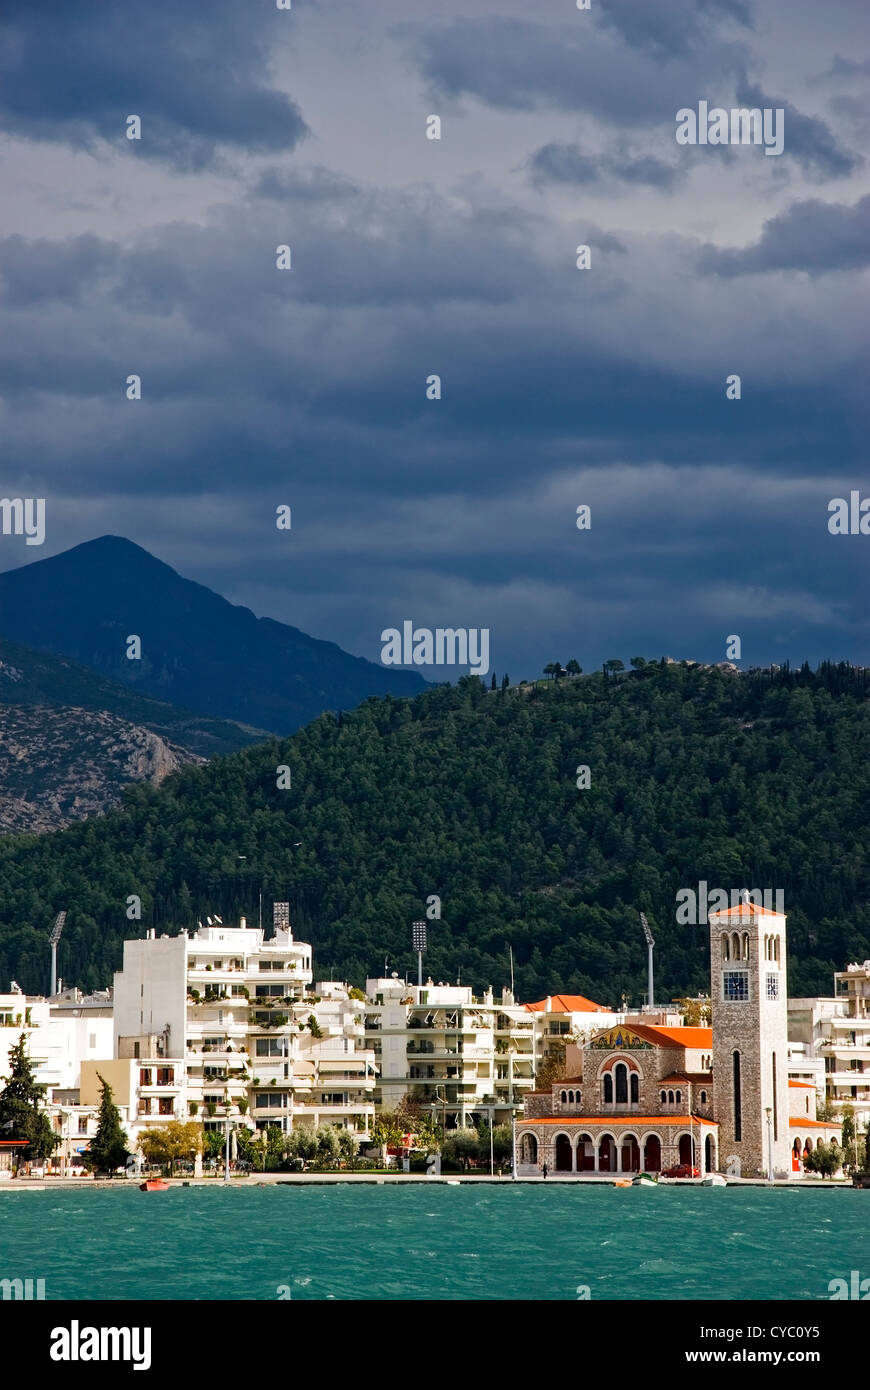 City of Volos (Thessaly, Greece) Stock Photo